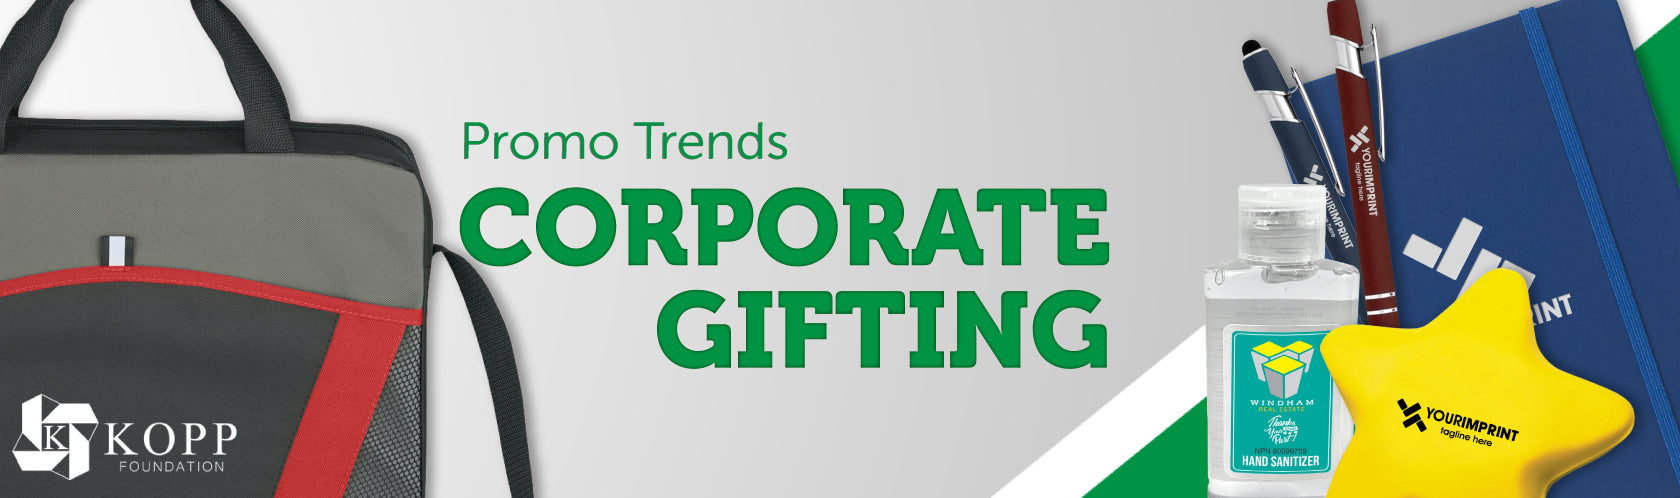 Promo Trends: Corporate Gifting